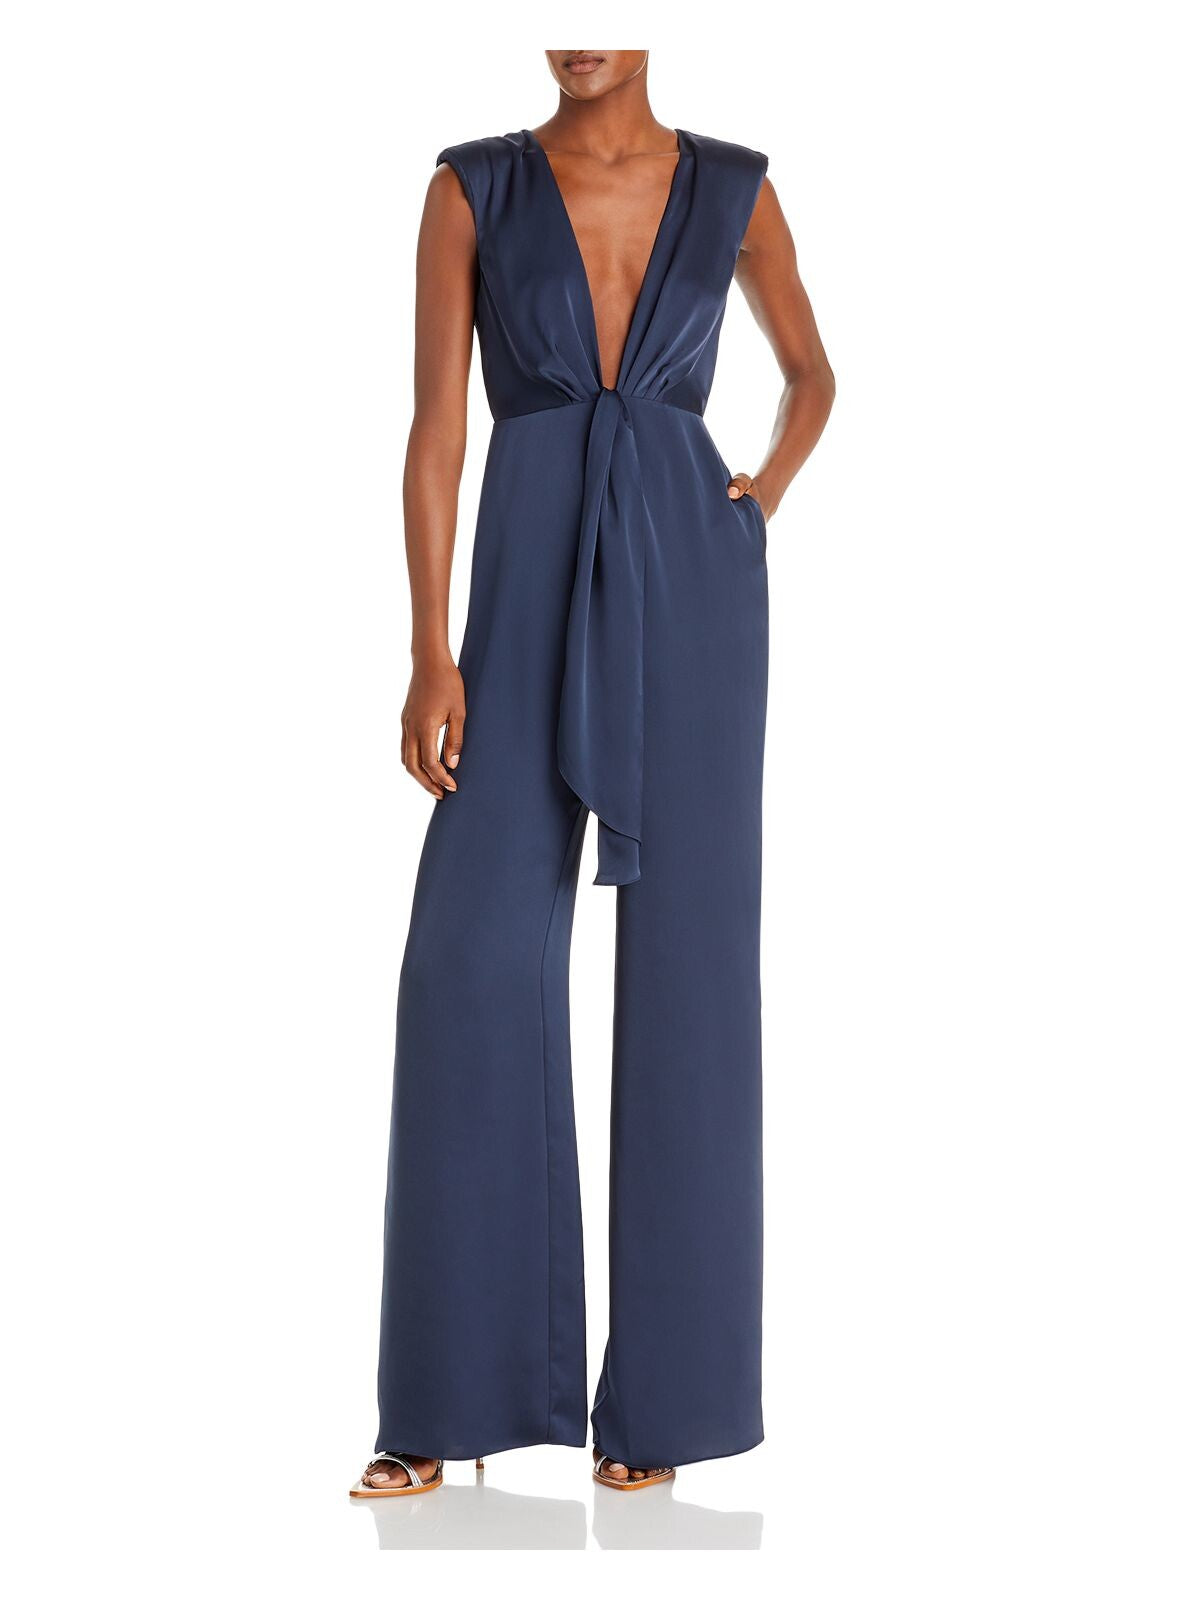 RAMY BROOK Womens Navy Zippered Pocketed Plunging Shoulder Pads Sleeveless V Neck Evening Wide Leg Jumpsuit 00